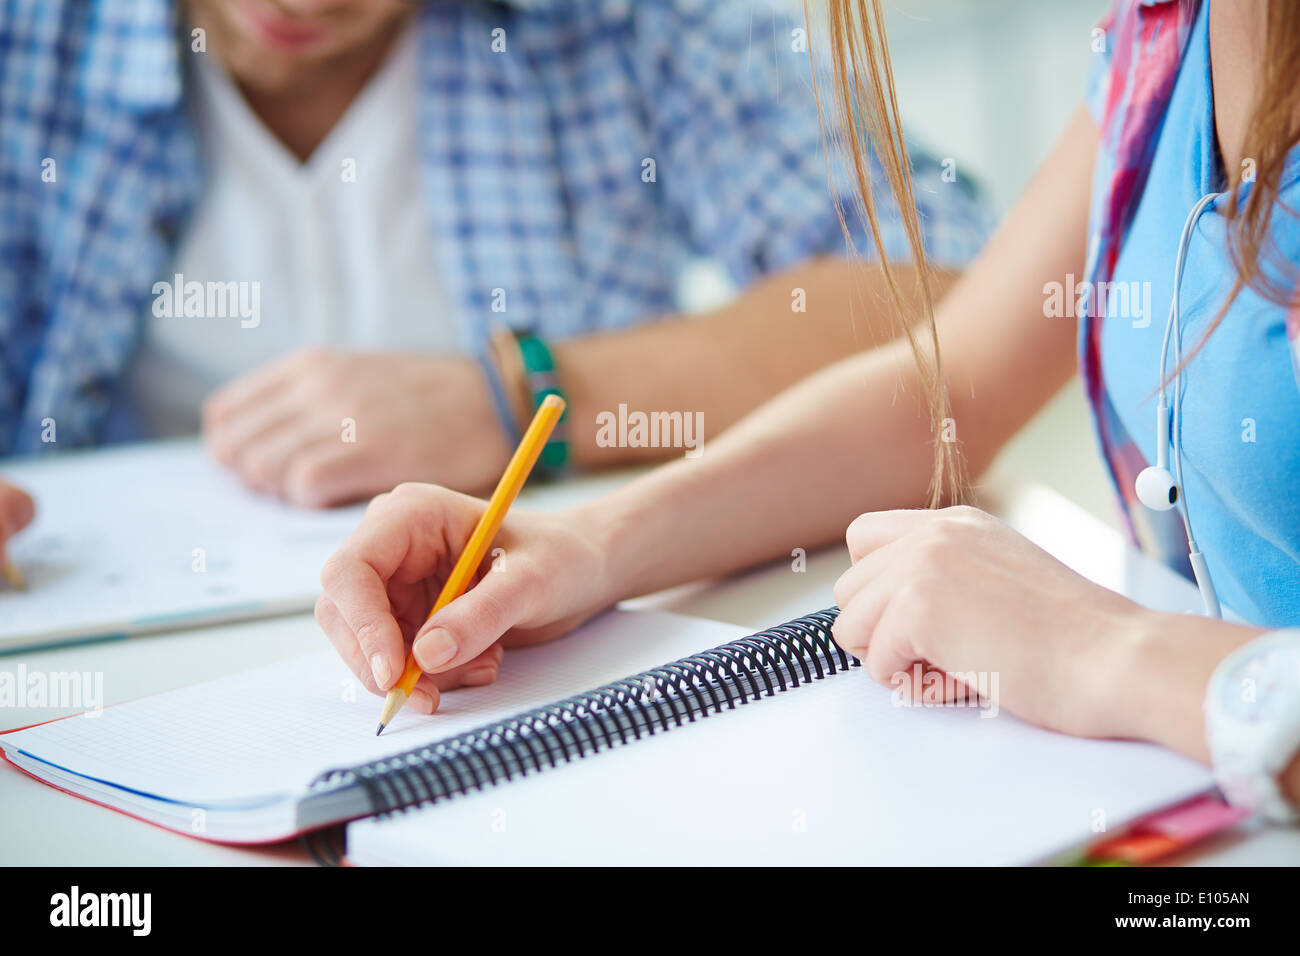 Hand of student with pencil carrying out written task or writing lecture Stock Photo